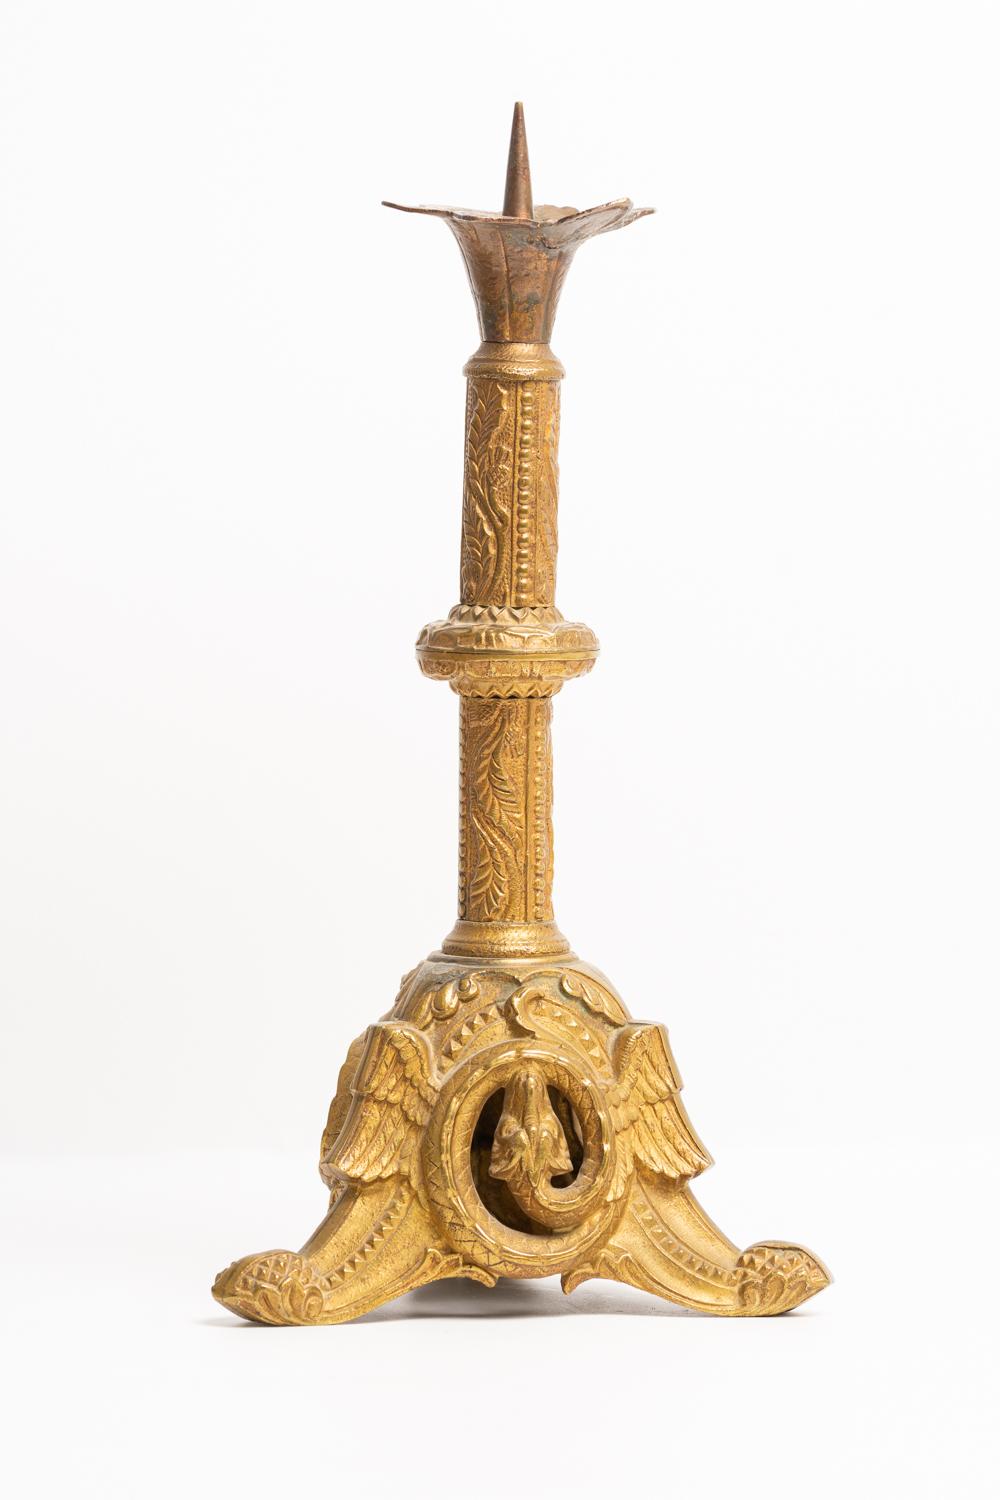 Antique 19th Century French Brass Pricket Candlesticks  In Good Condition For Sale In Portland, GB